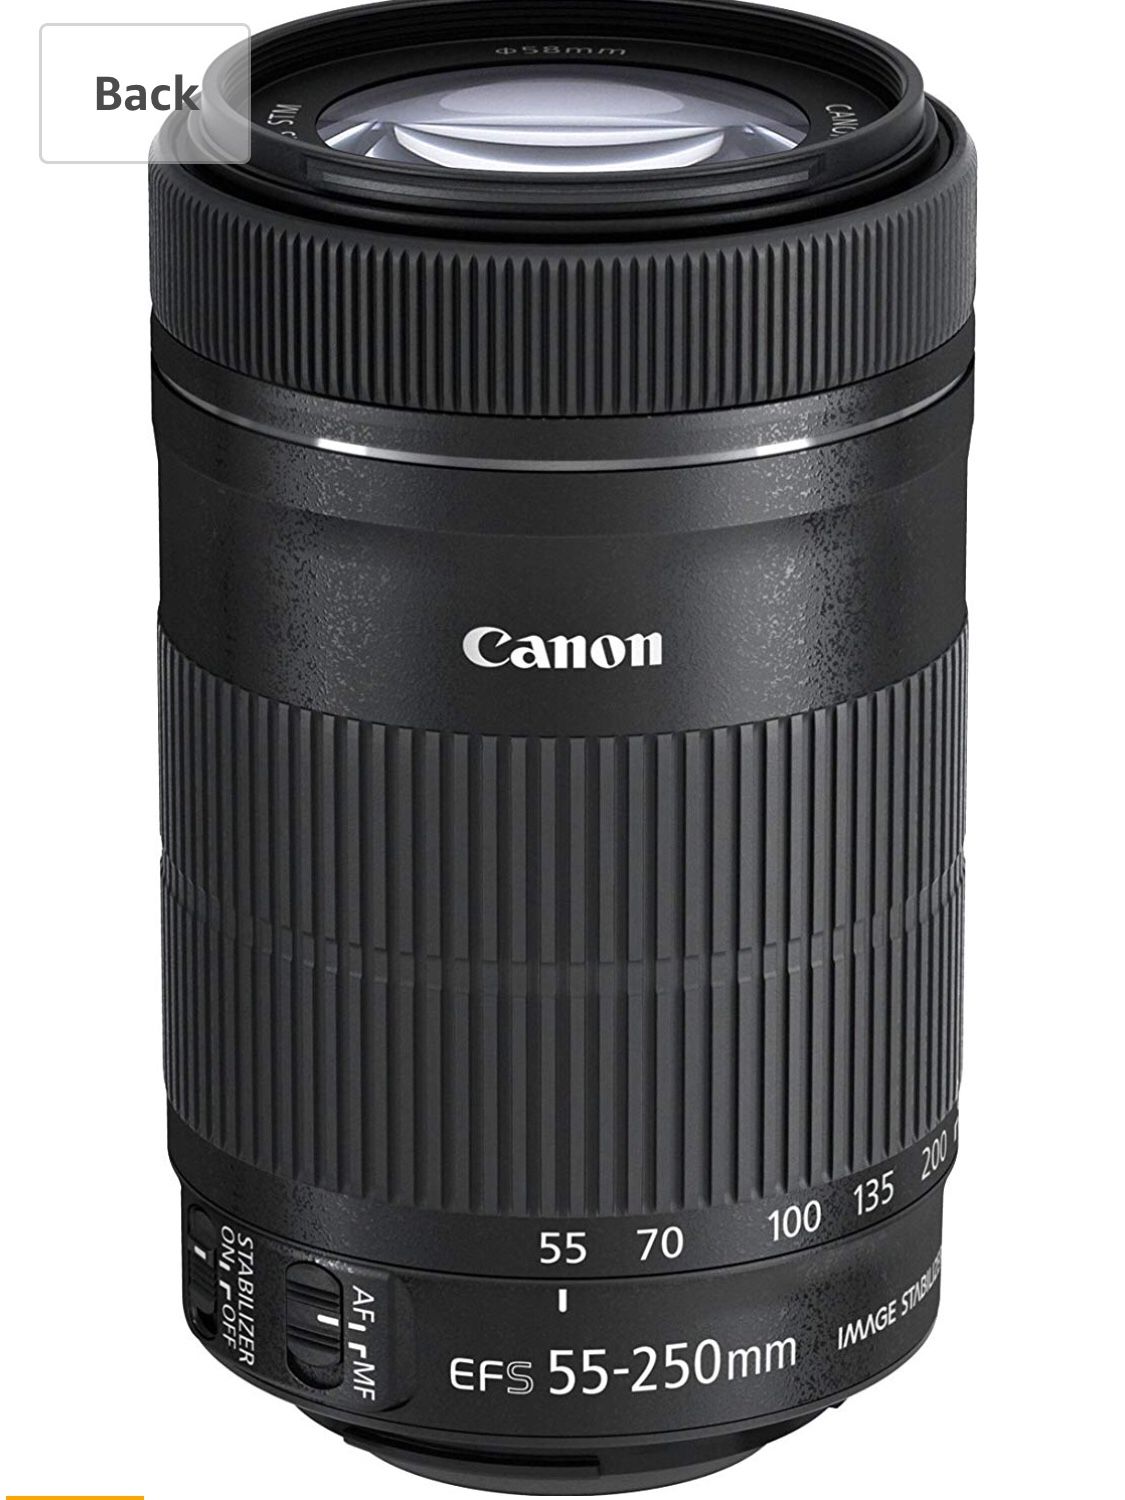 Canon EF-S 55-250 IS 4.-5.6